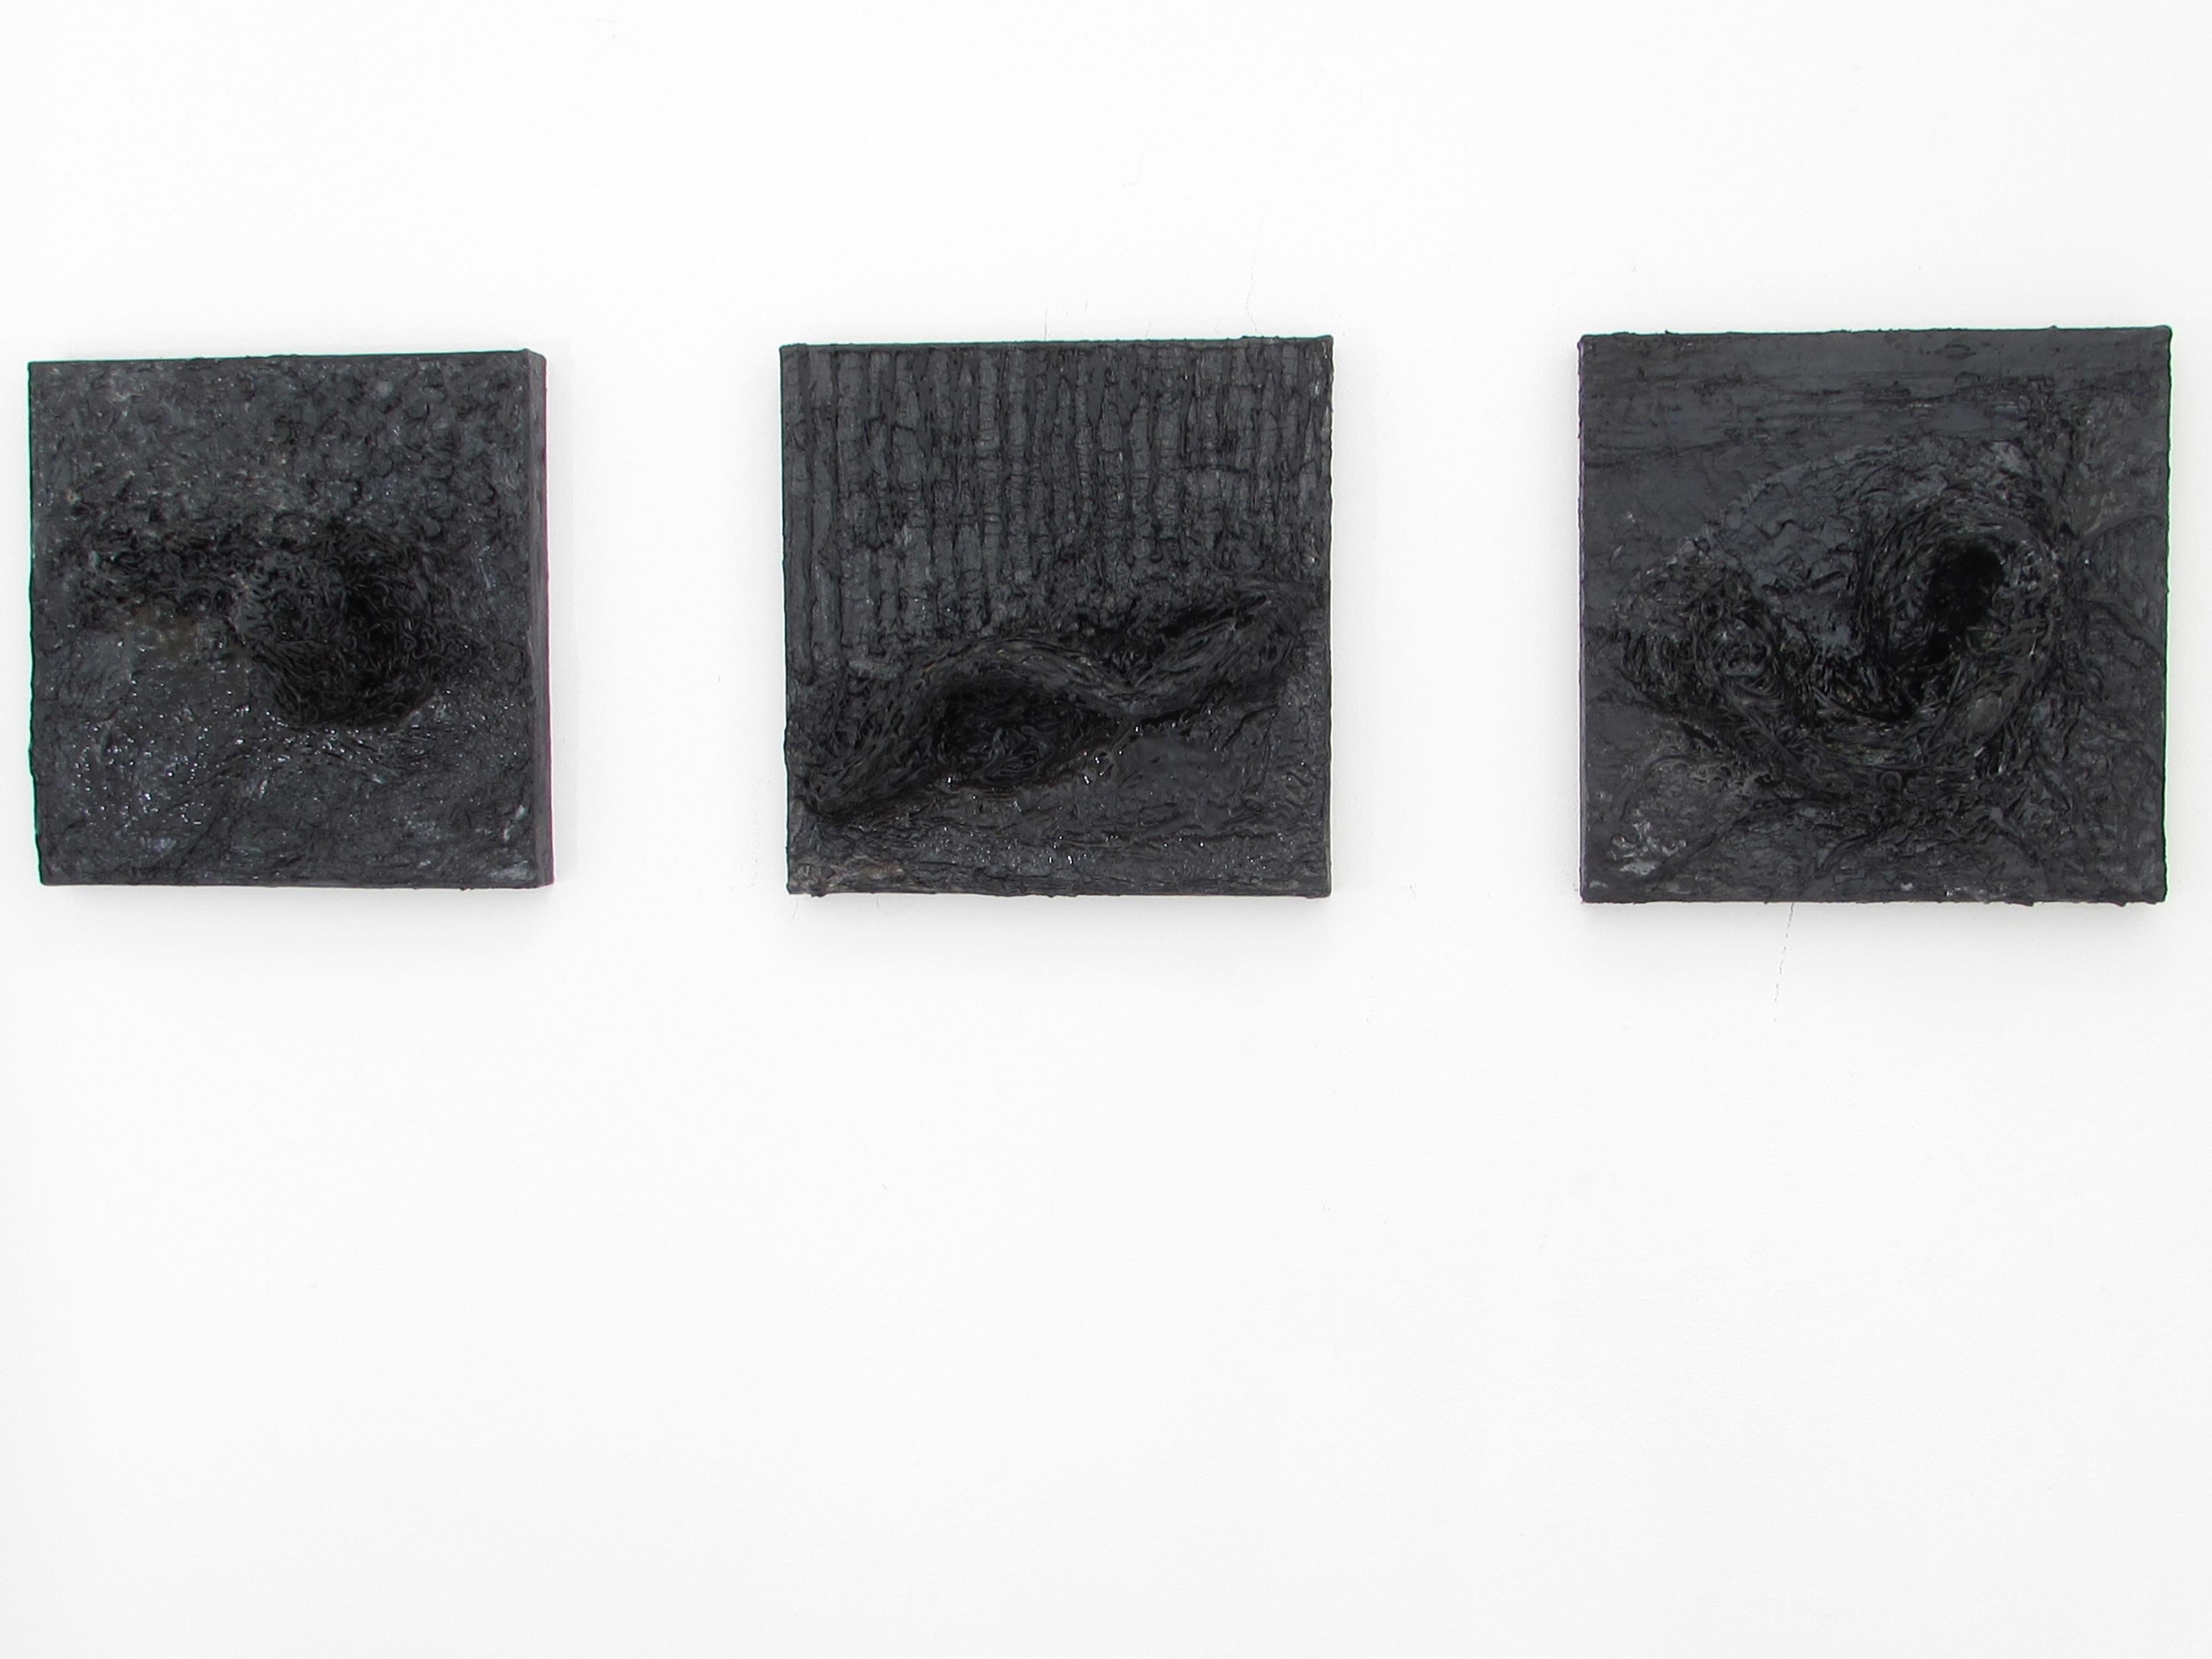 Untitled 03, 2015 - 2016
Mixed technique: black silicone, oil paint, wire structure on canvas
(Signed on reverse)
15.74 H x 15.74 W in
40 H x 40 W cm

Zsolt Berszán’s work speaks of repulsion and fascination and at the same time speaks about shapes